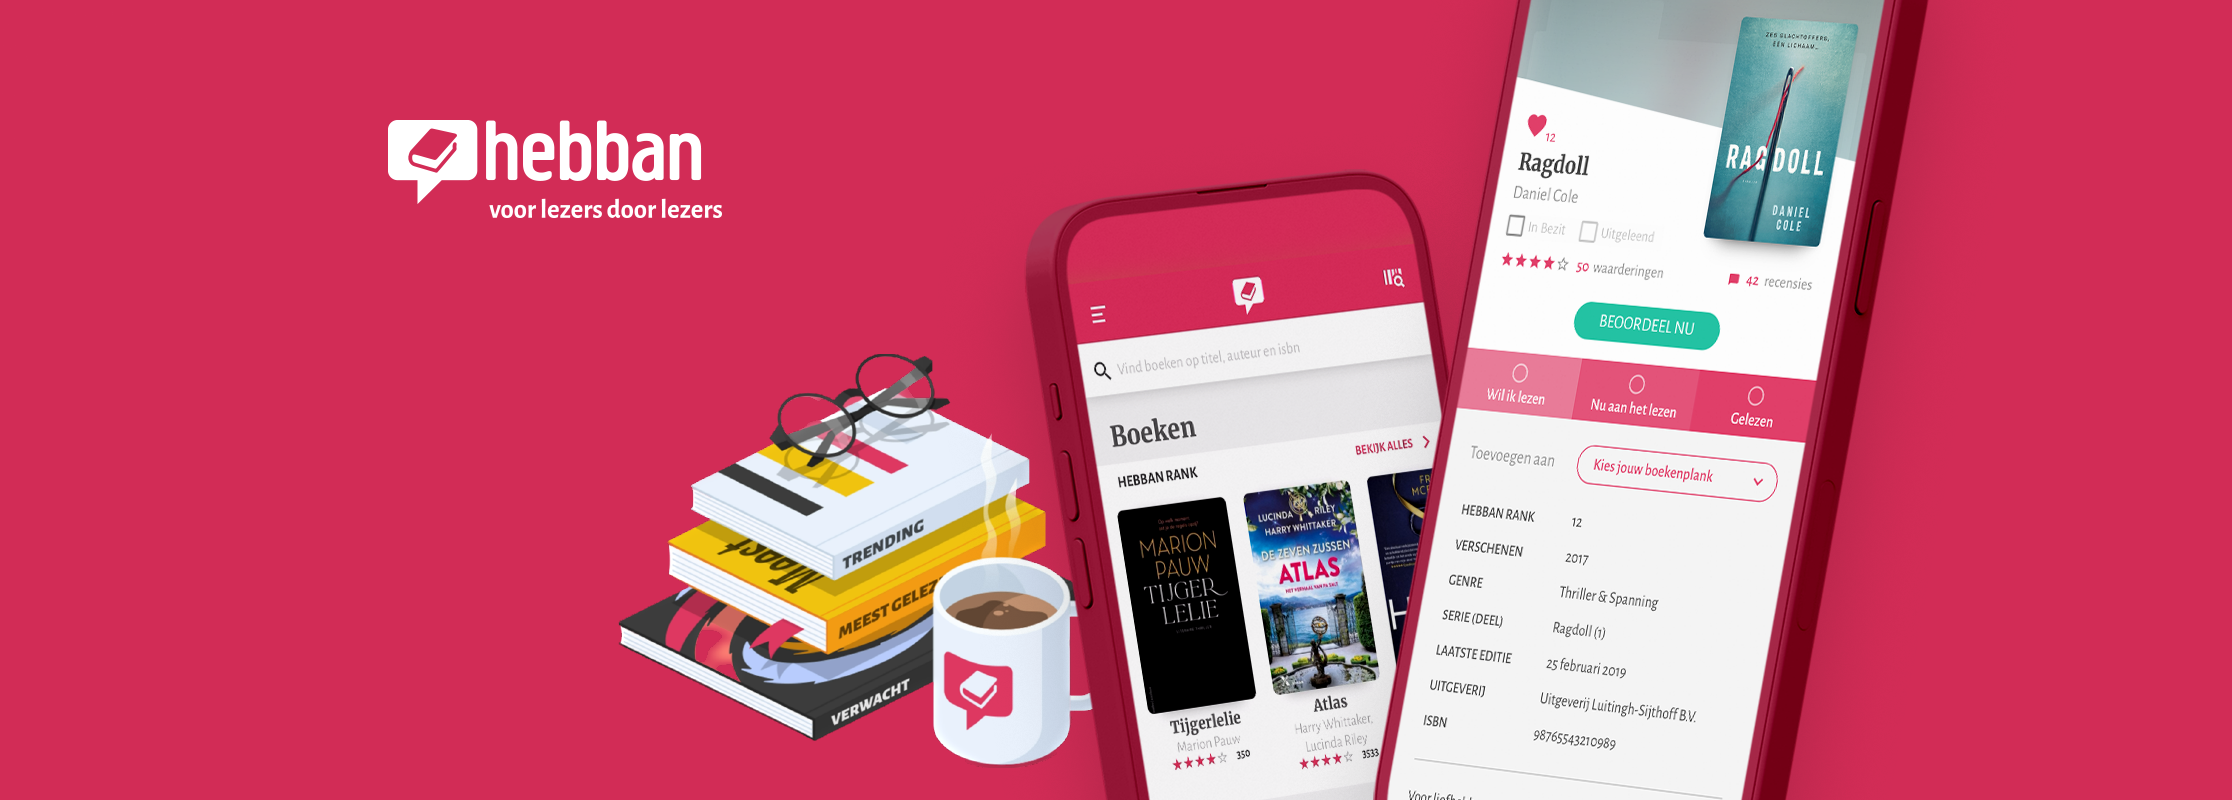 Hebban app: the largest community of readers in the Netherlands